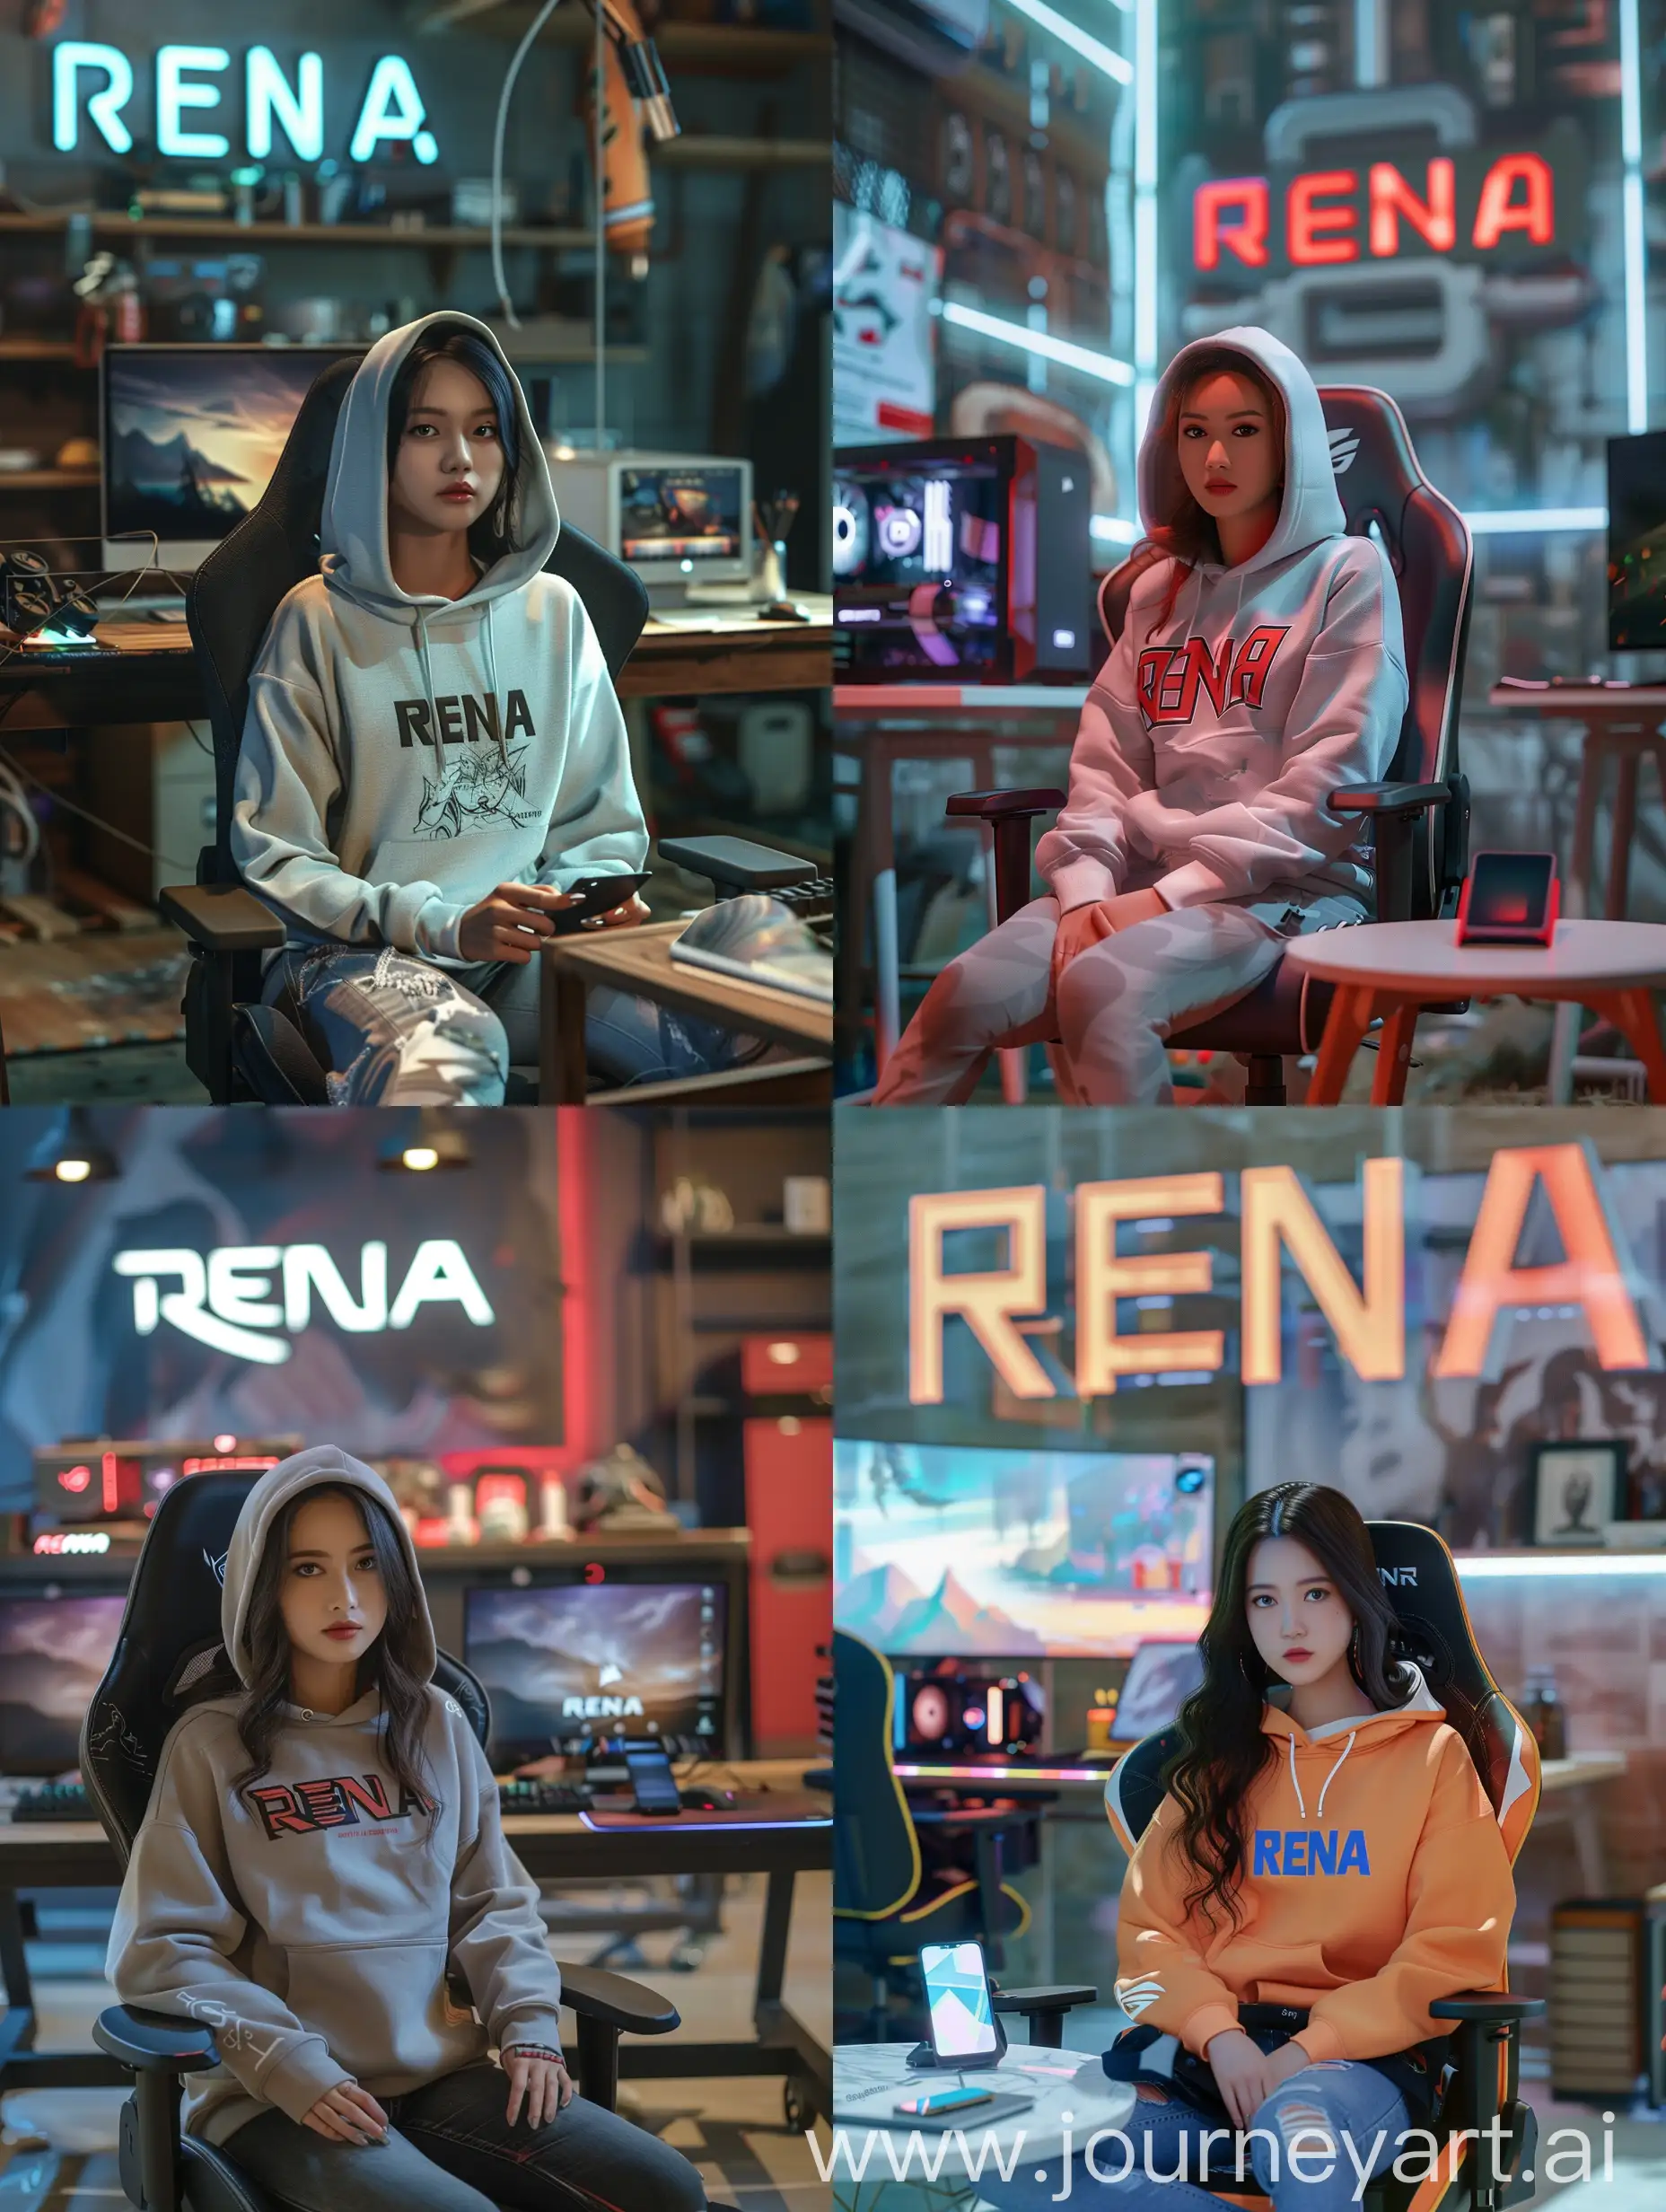 A 32 year old Indonesian woman sits on a gaming chair wearing a 'RENA' hoodie. In front of him a gaming pc, an Apple phone on a table, with a realistic HD background of a room with the word 'RENA' written on it.Real photo.